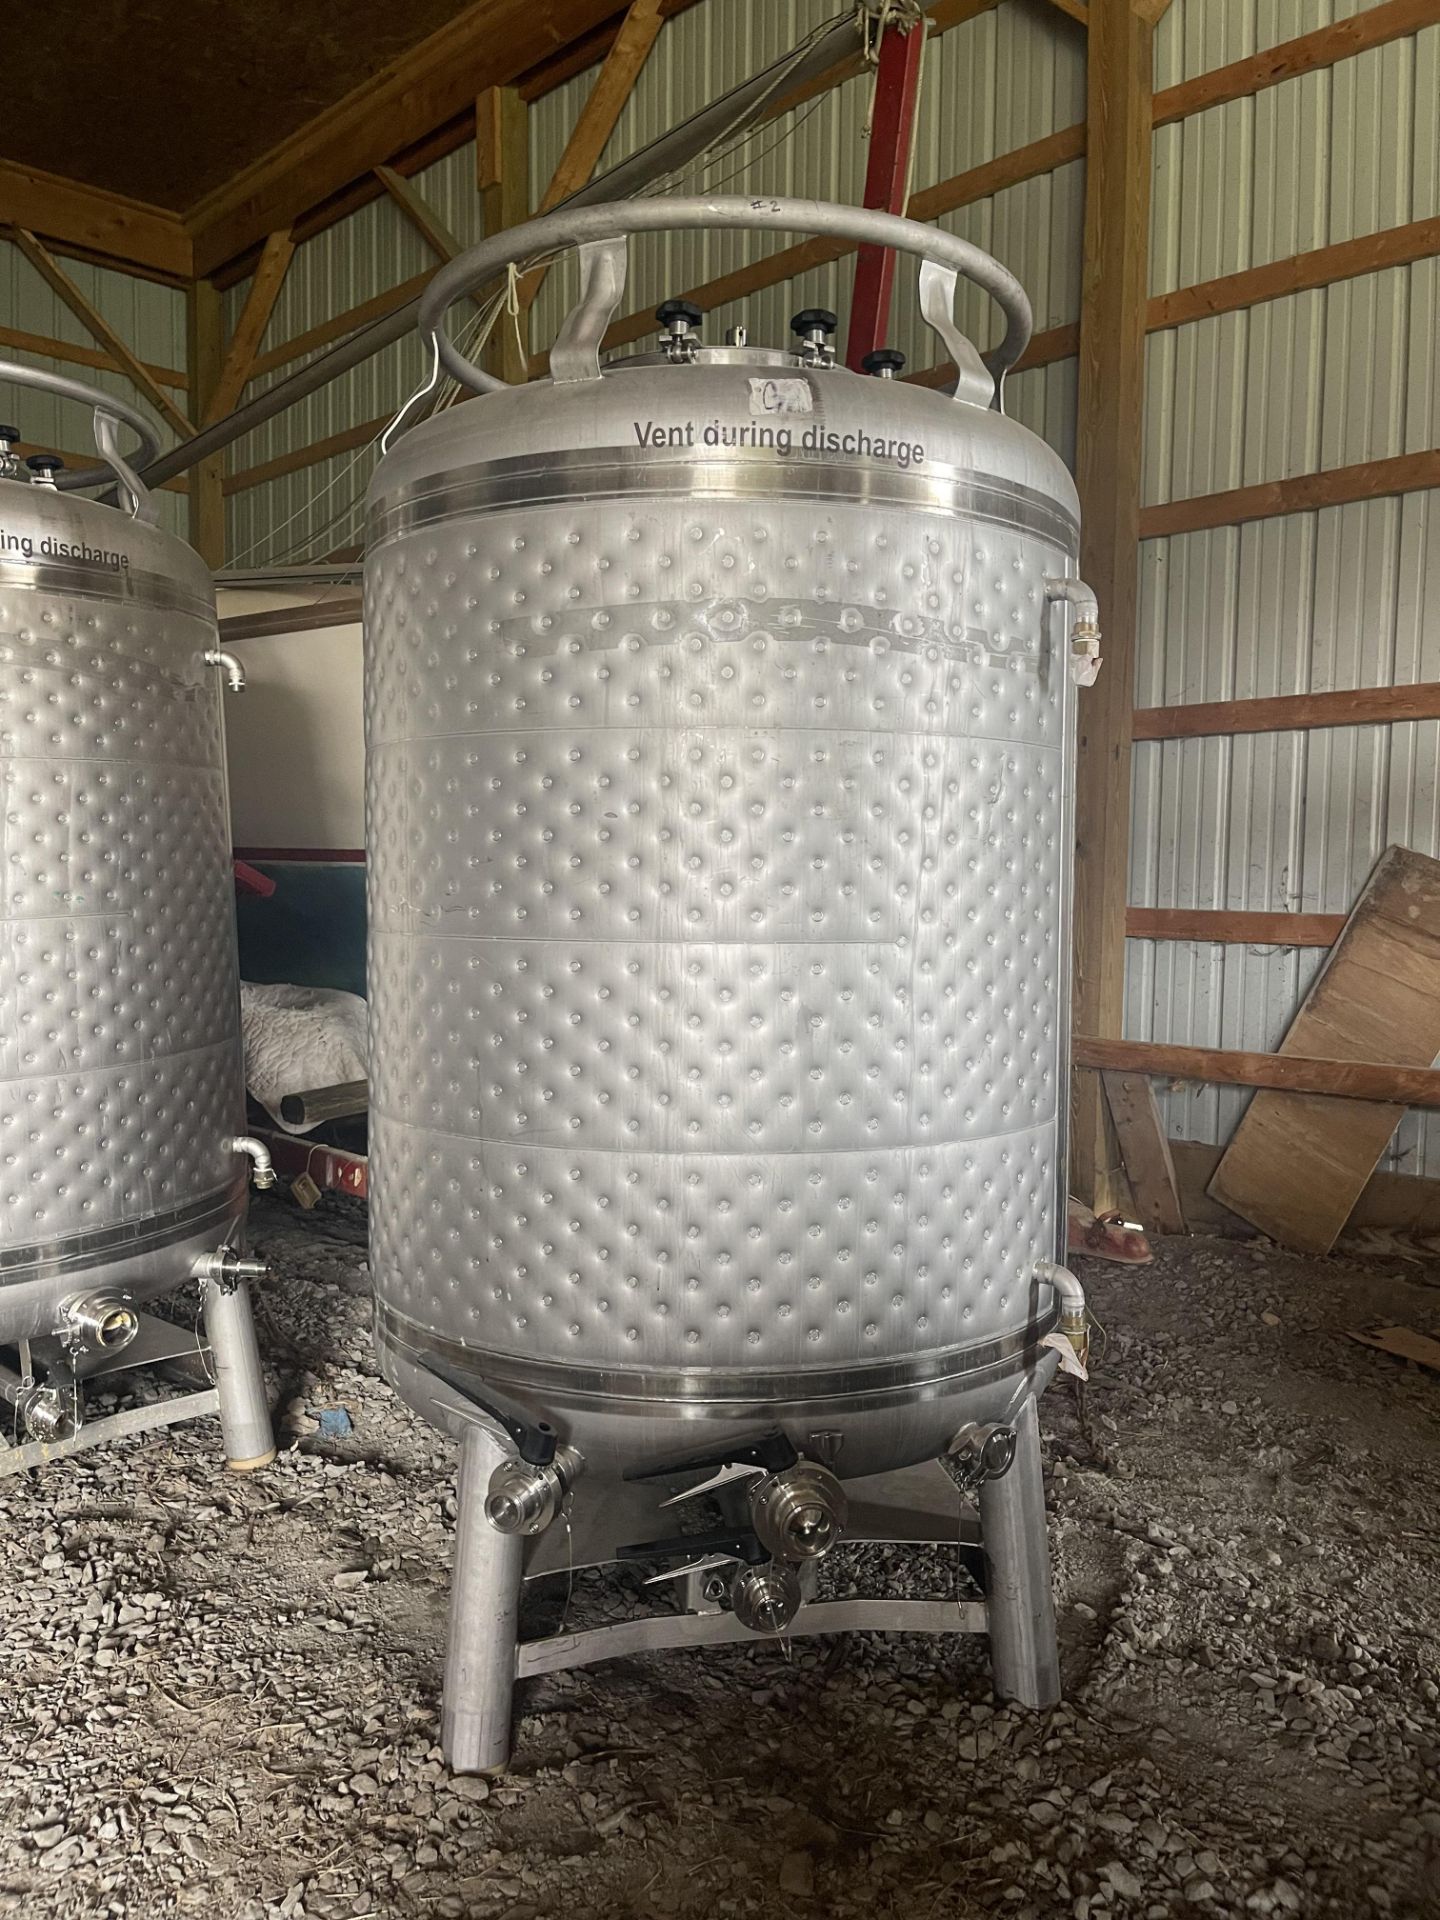 7 BBL Stainless Steel Grundy Tank, Dimple Jacketed | Rig Fee $500